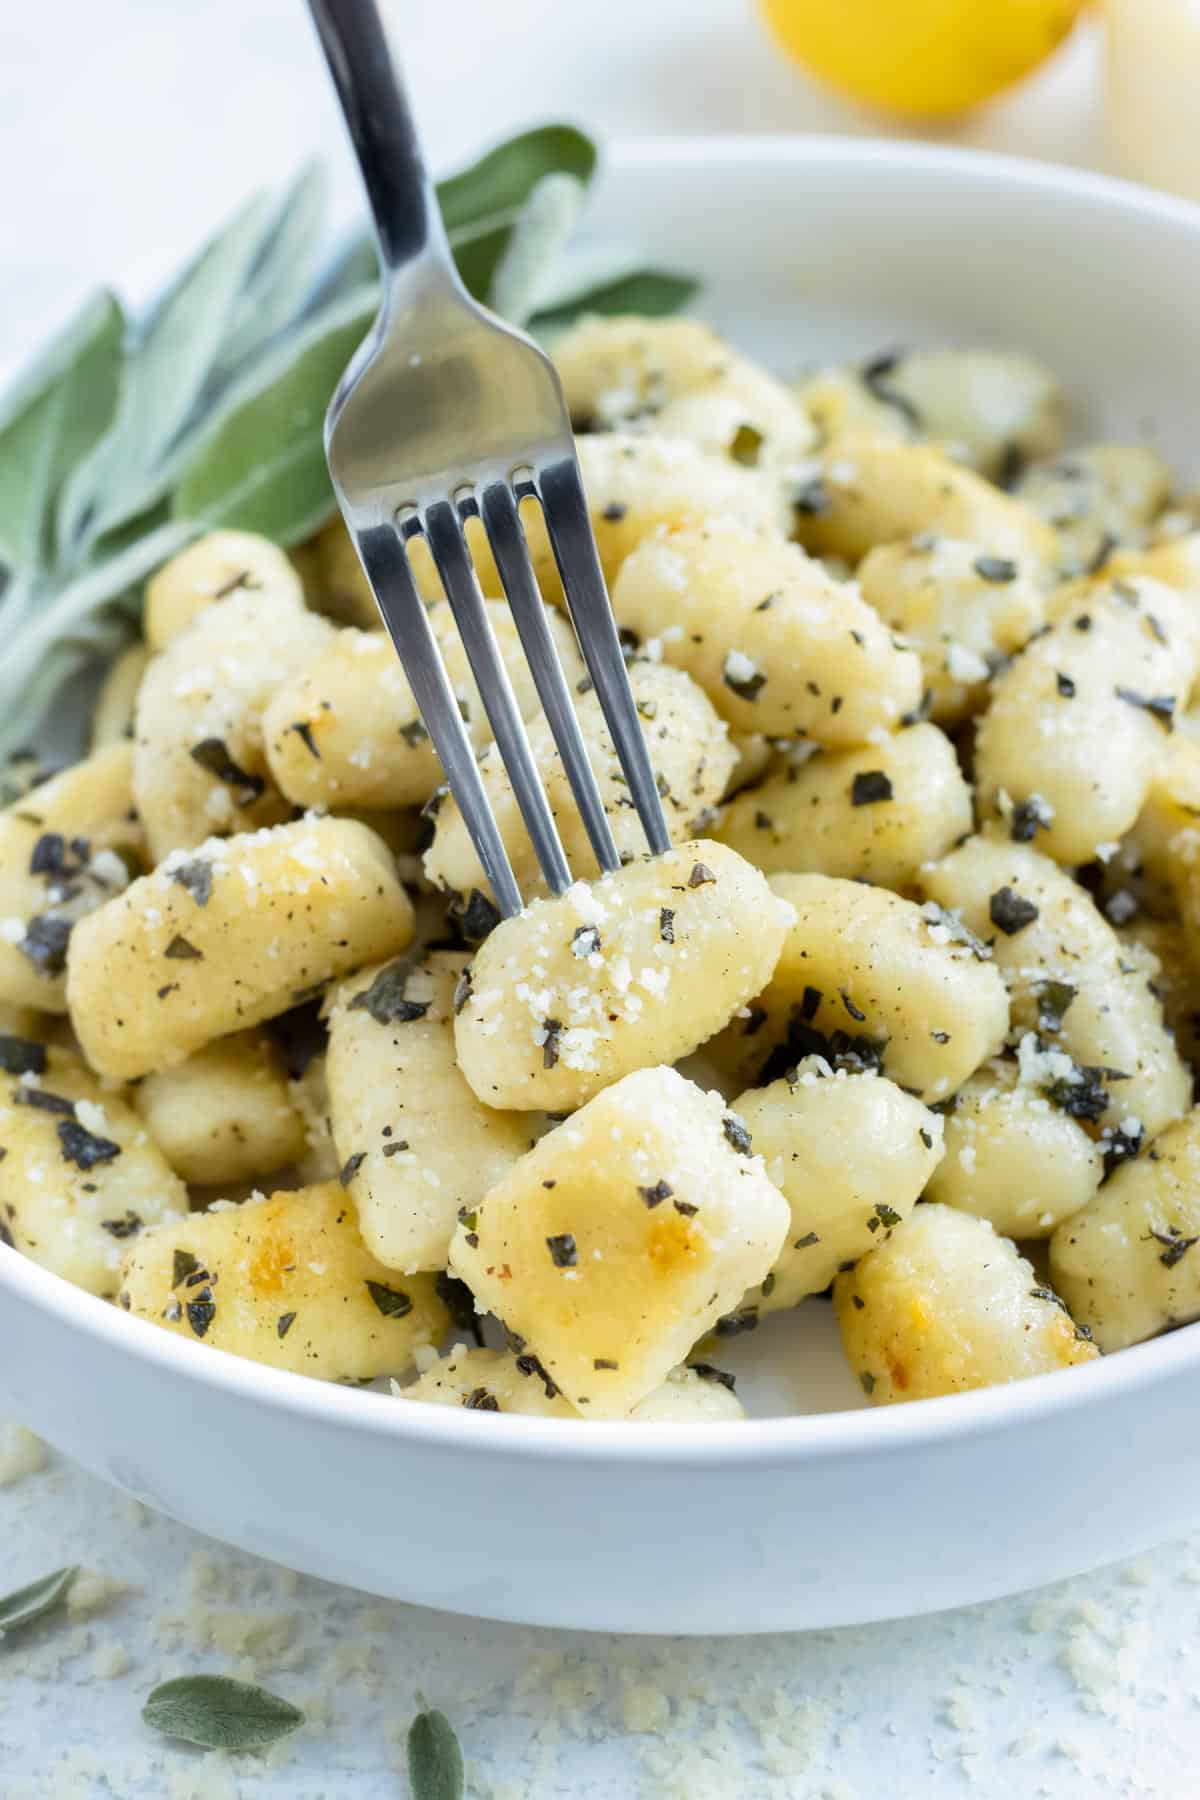 Gluten-free gnocchi is enjoyed with a fork from a bowl.